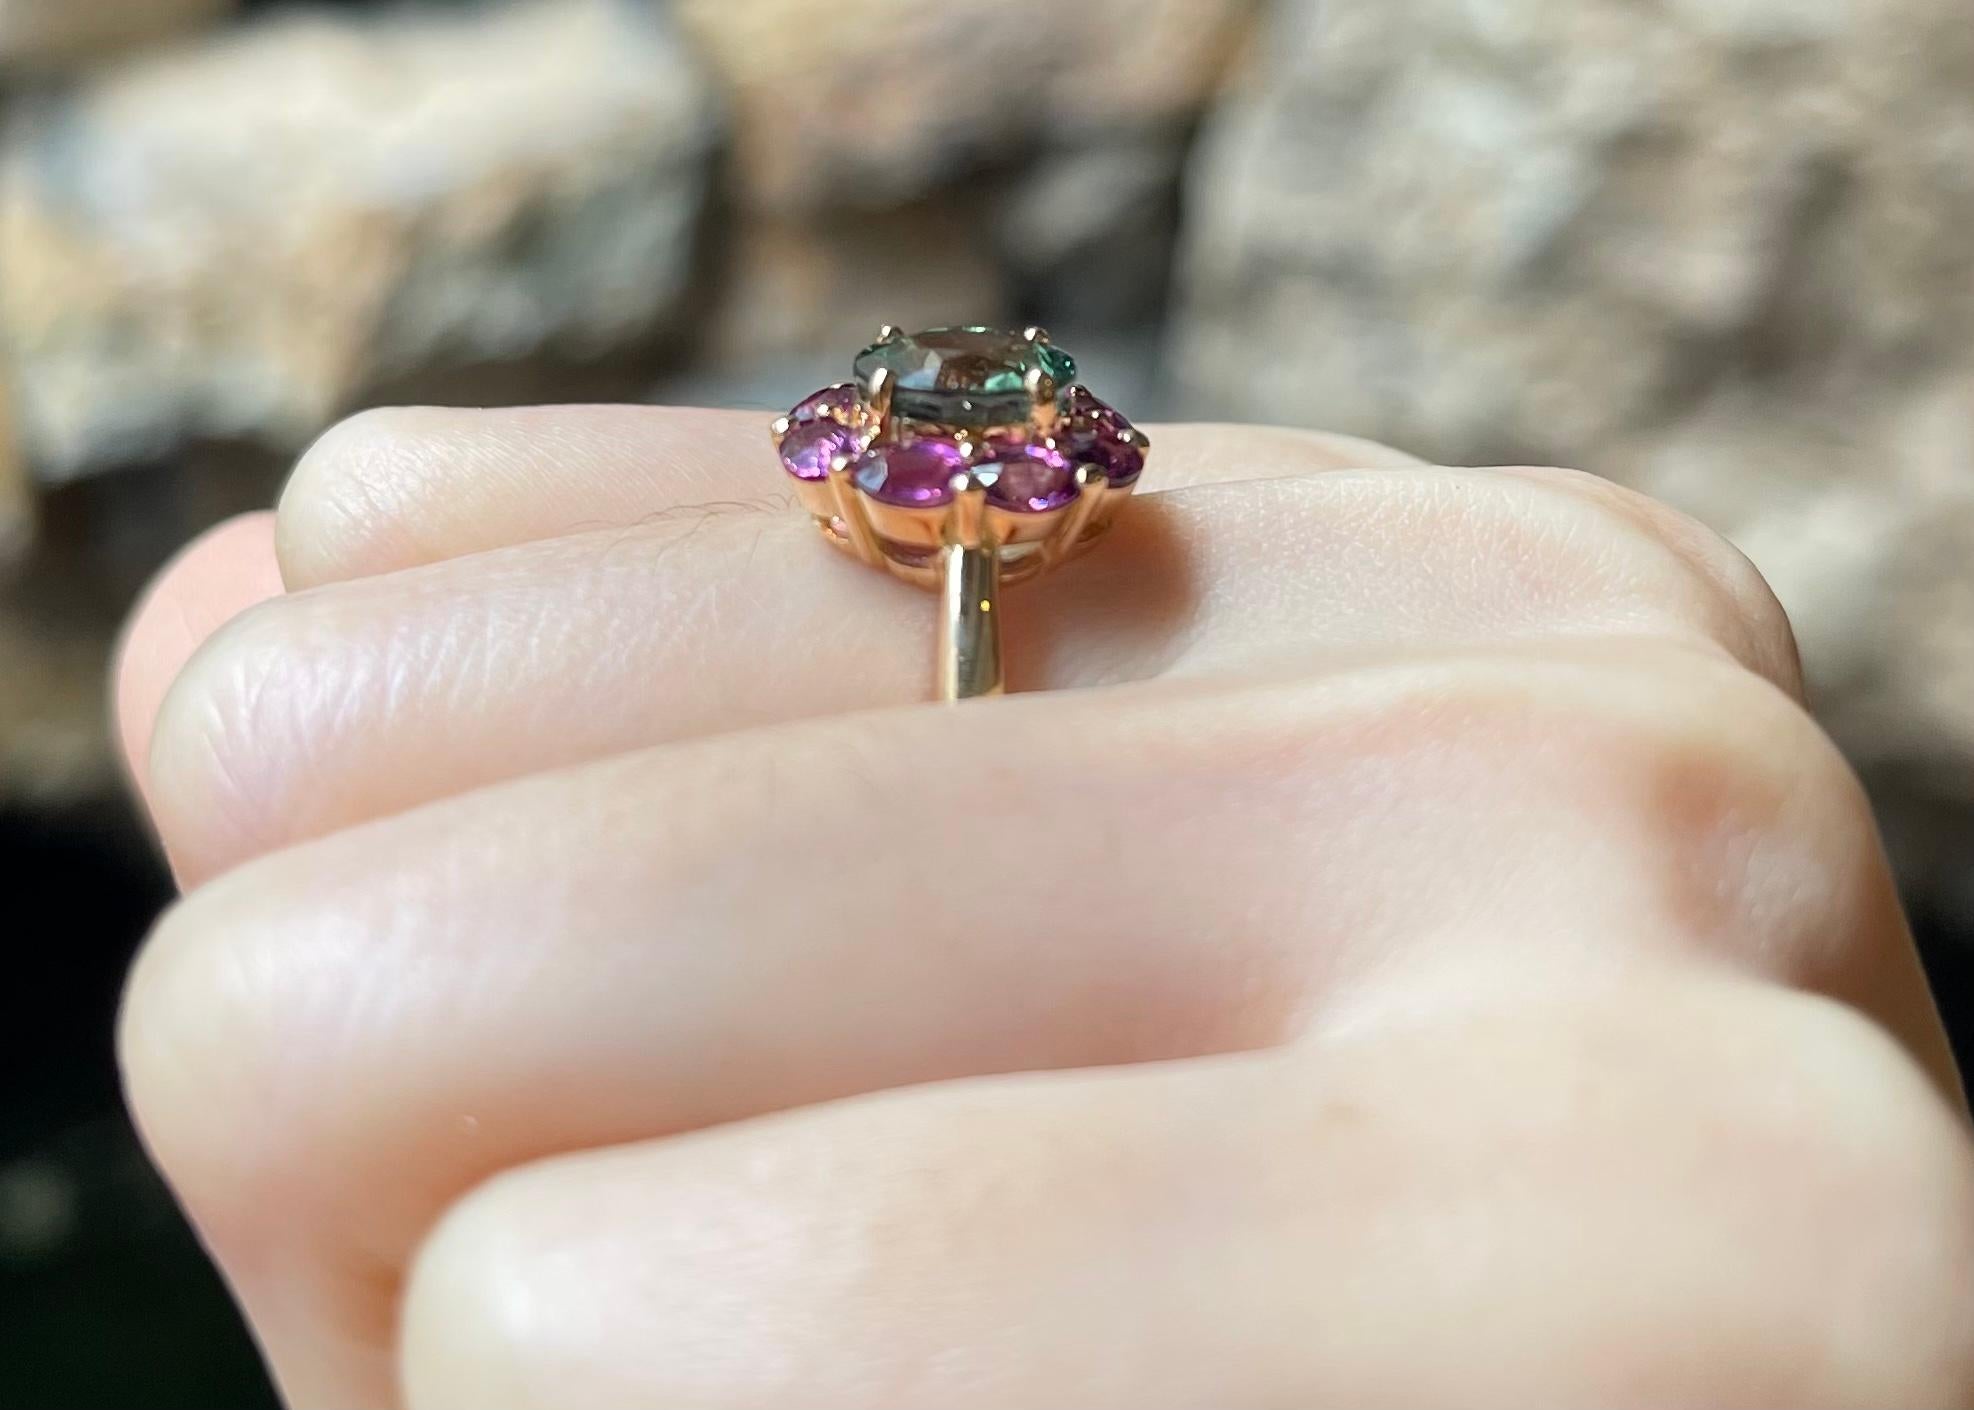 Almandite 1.85 carats and Demantoid 2.95 carats Ring set in 18K Rose Gold Settings

Width:  1.2 cm 
Length: 1.4 cm
Ring Size: 52
Total Weight: 6.89 grams

